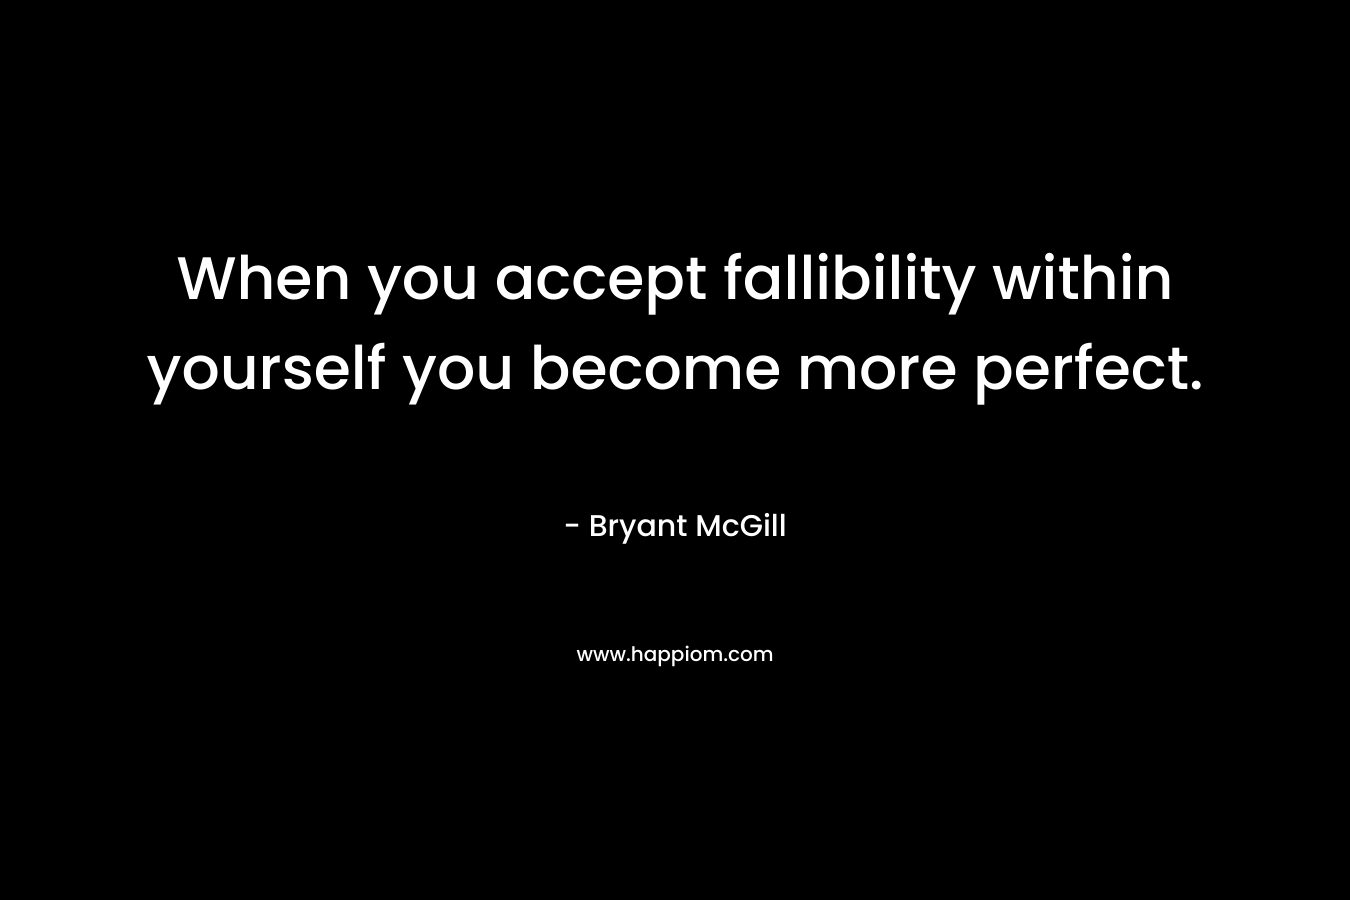 When you accept fallibility within yourself you become more perfect.